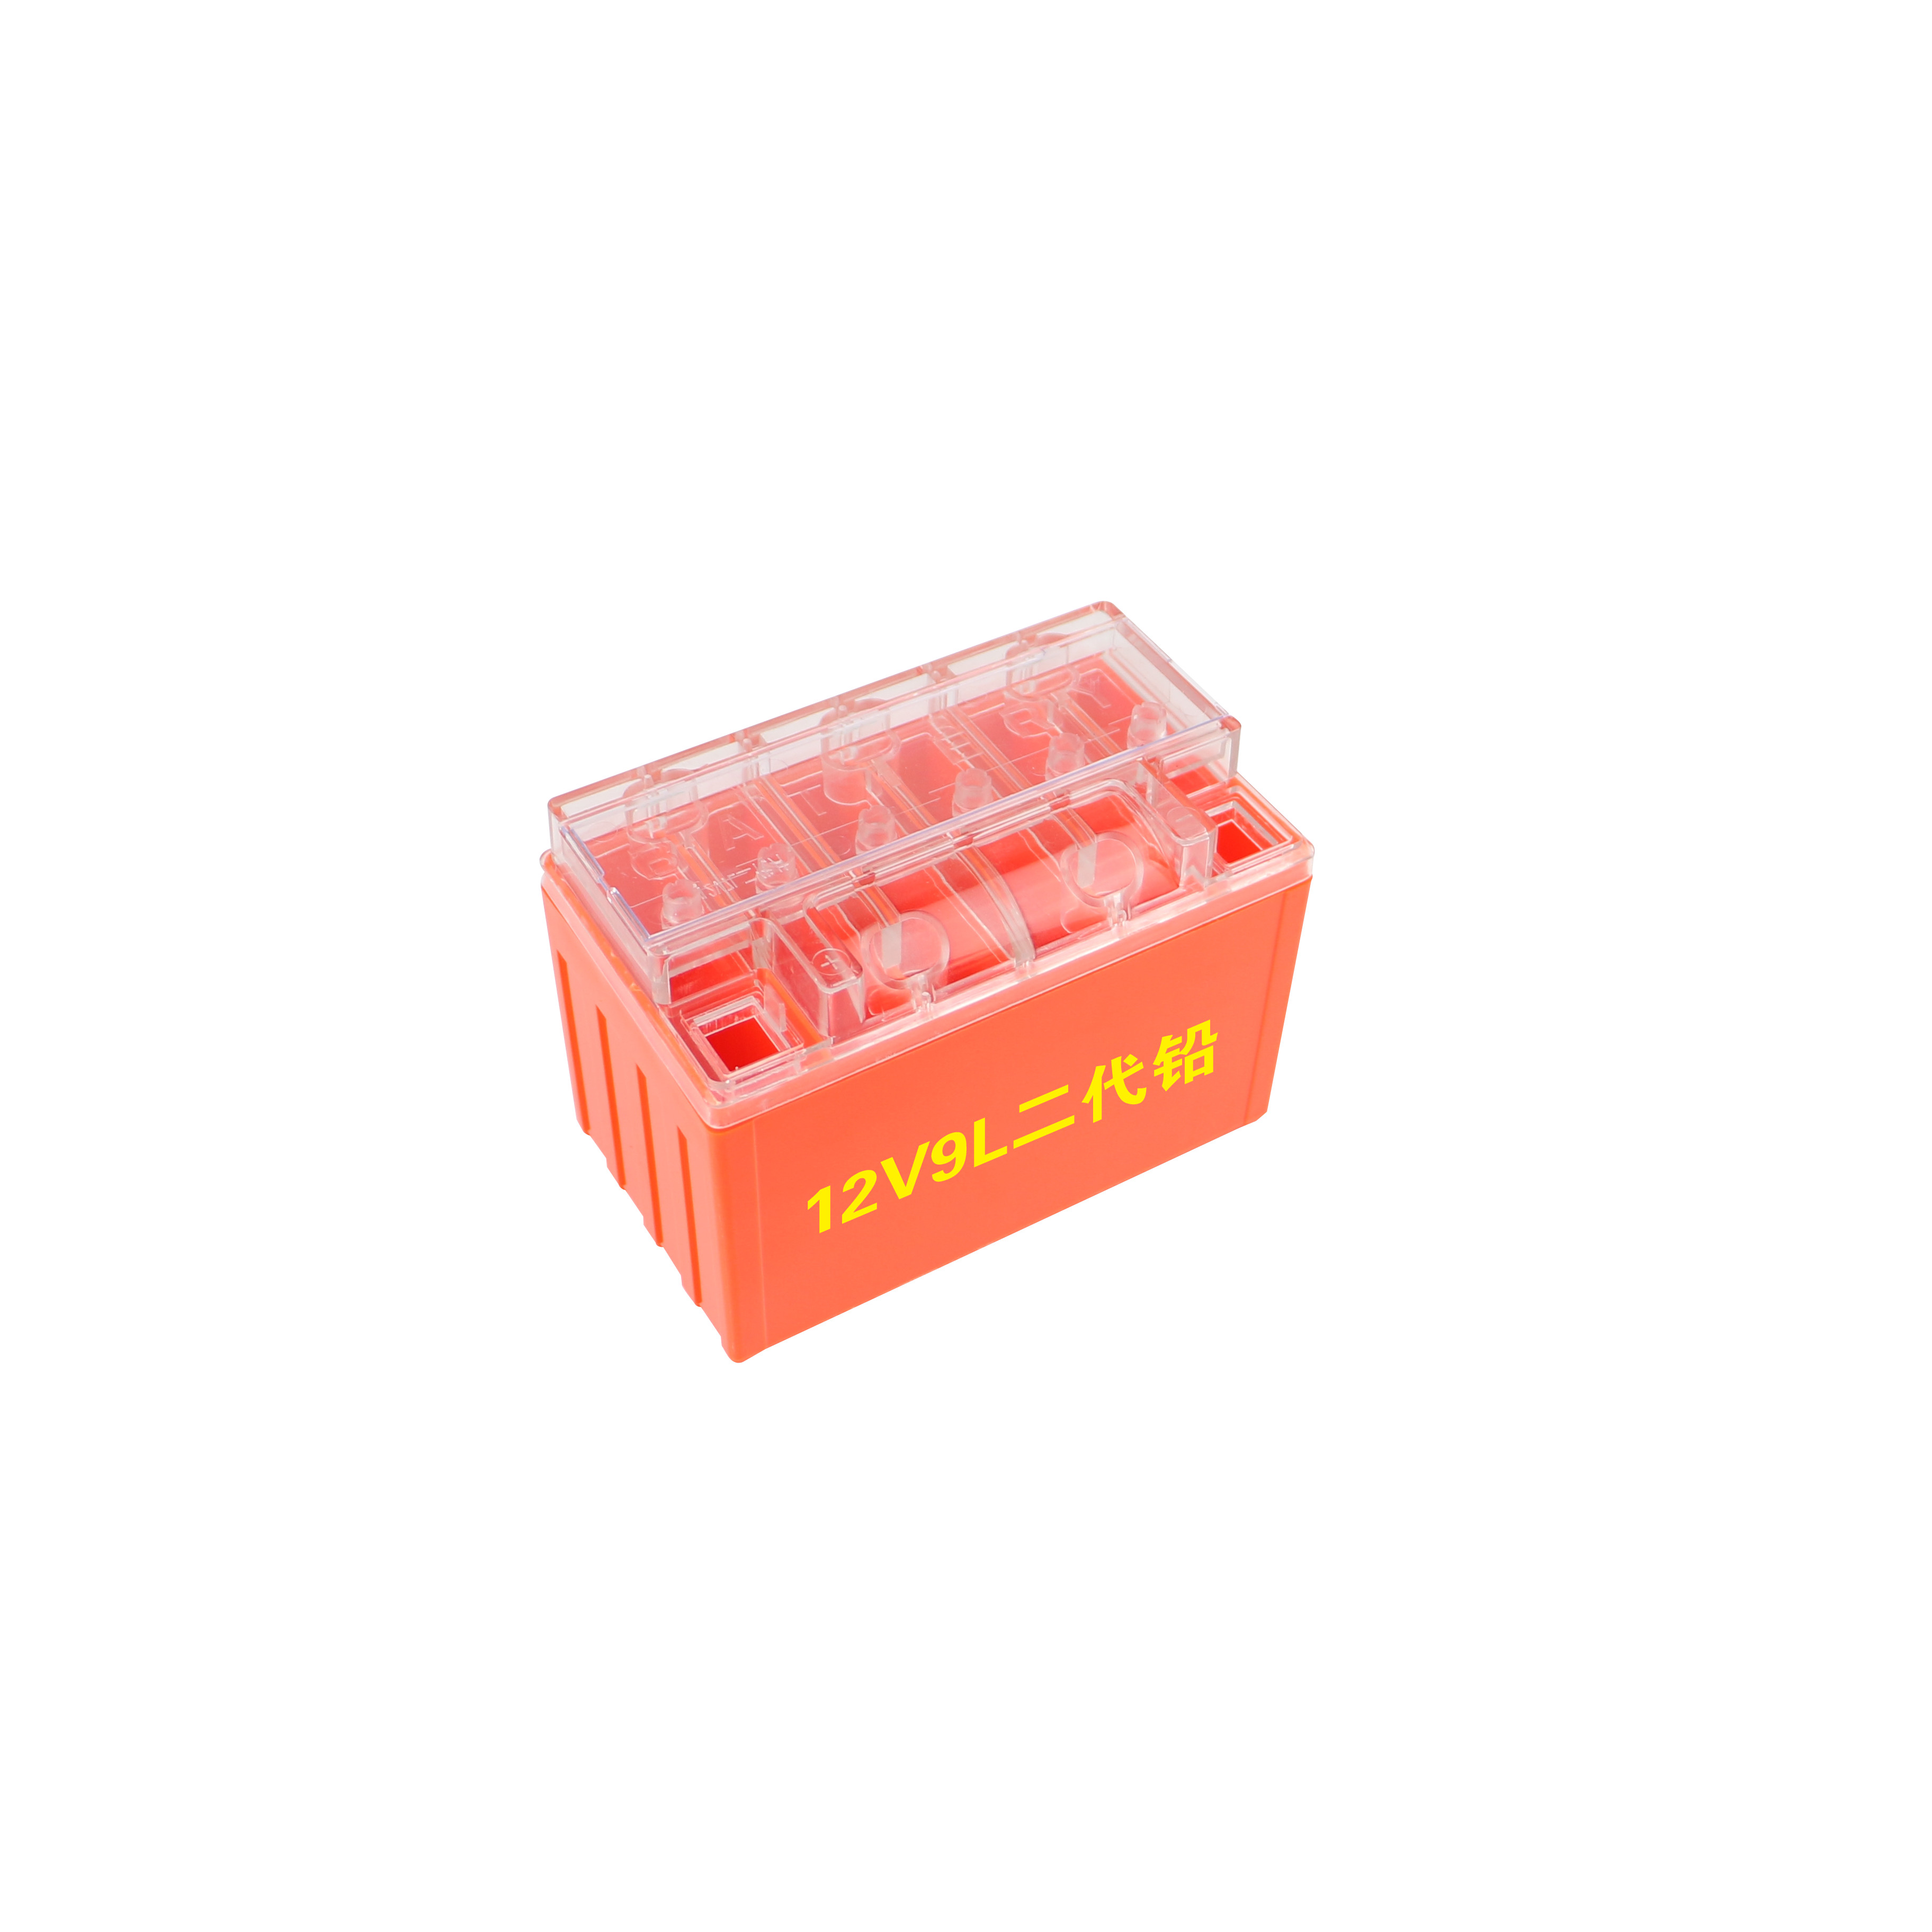 12V9L Injection Molding , Battery Box Mould  / Multi Material Injection Molding